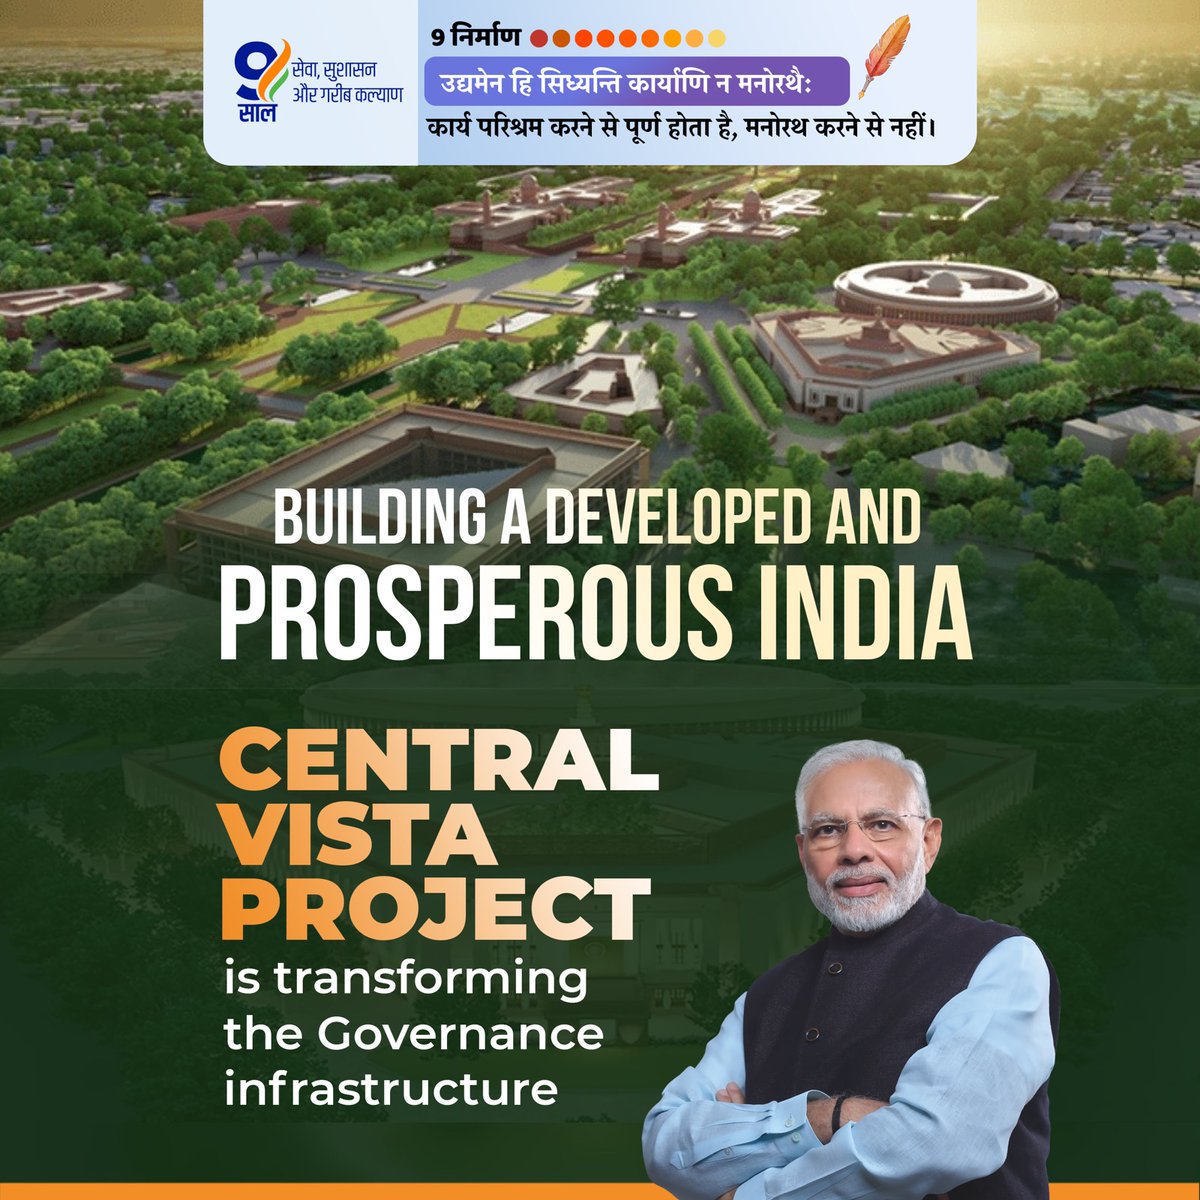 The Central Vista Project signifies that modernization and the best utilisation of our resources & infrastructure form our goal in the ‘Amrit Kaal’ of the nation! 

#NavNirmanKe9Saal